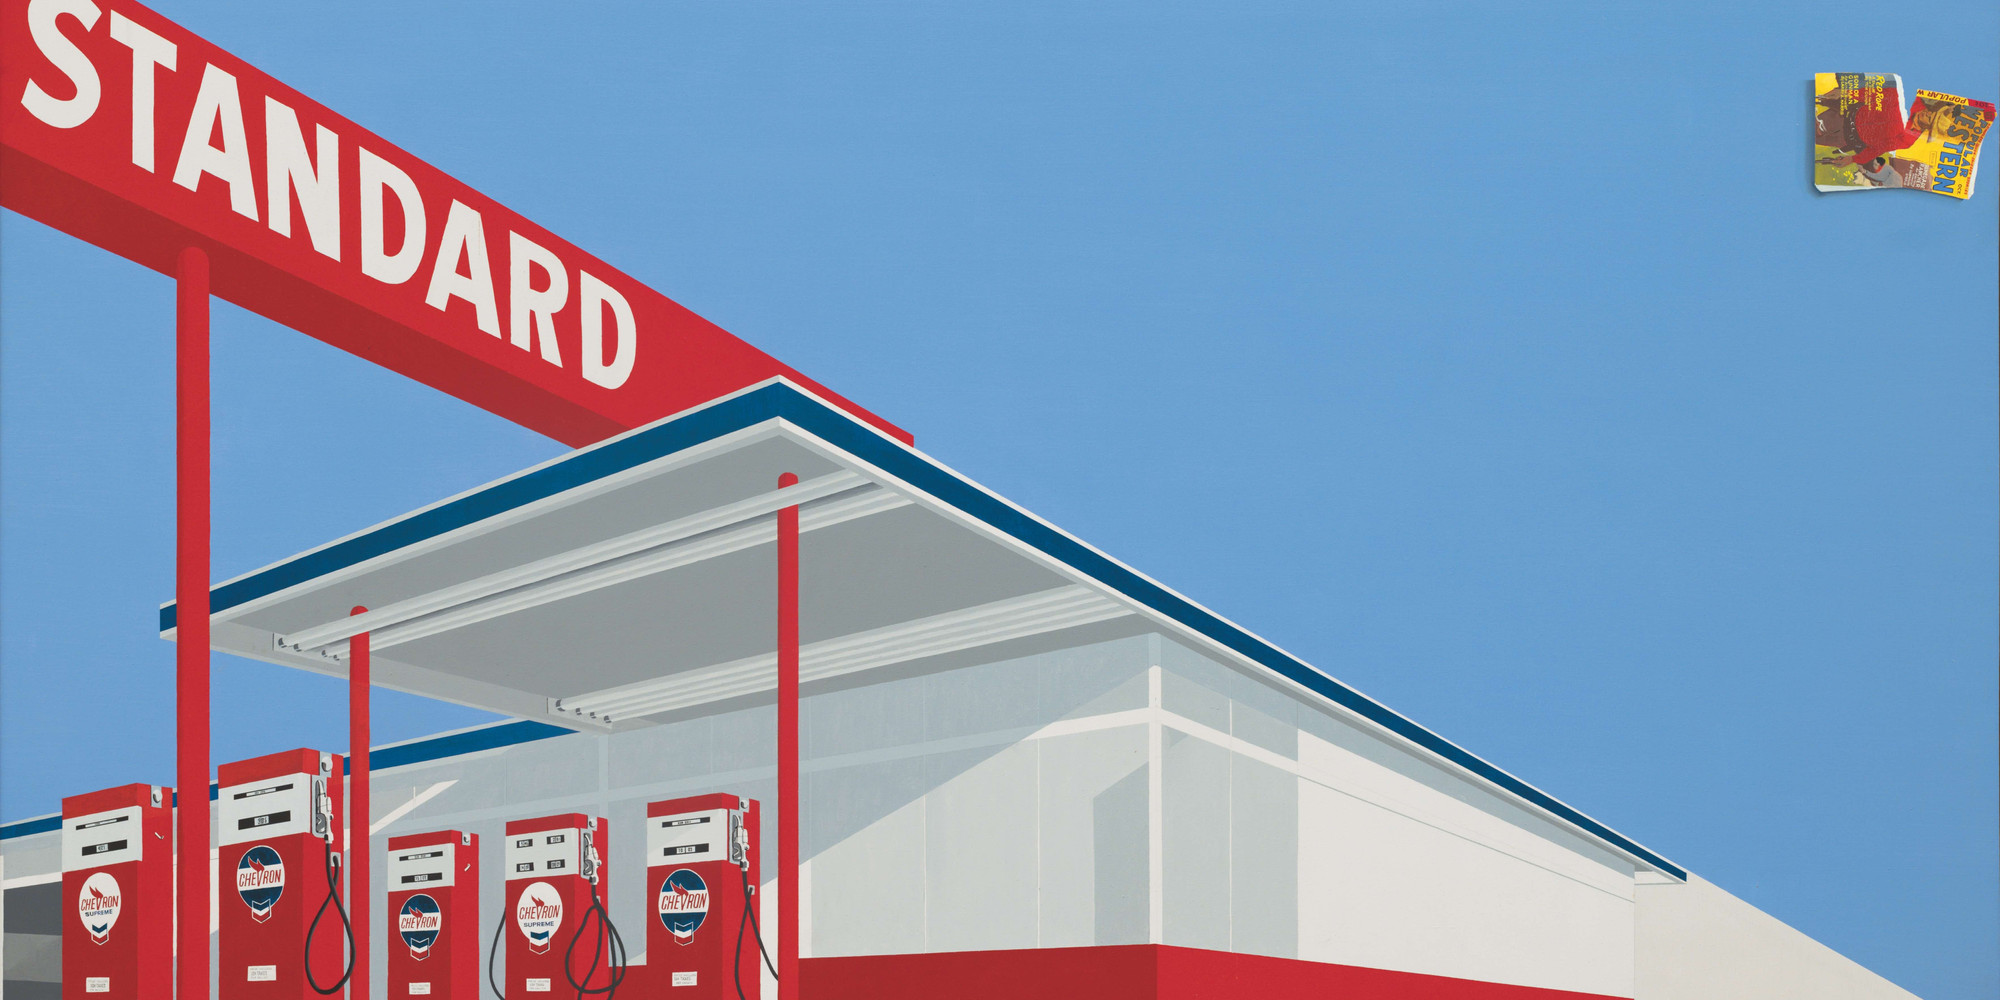 Ed Ruscha. Standard Station, Ten-Cent Western Being Torn in Half. 1964. Oil on canvas, 65 × 121 1/2&#34; (165.1 × 308.6 cm). Private collection. © 2023 Edward Ruscha. Photo: Evie Marie Bishop, courtesy of The Modern Art Museum of Fort Worth